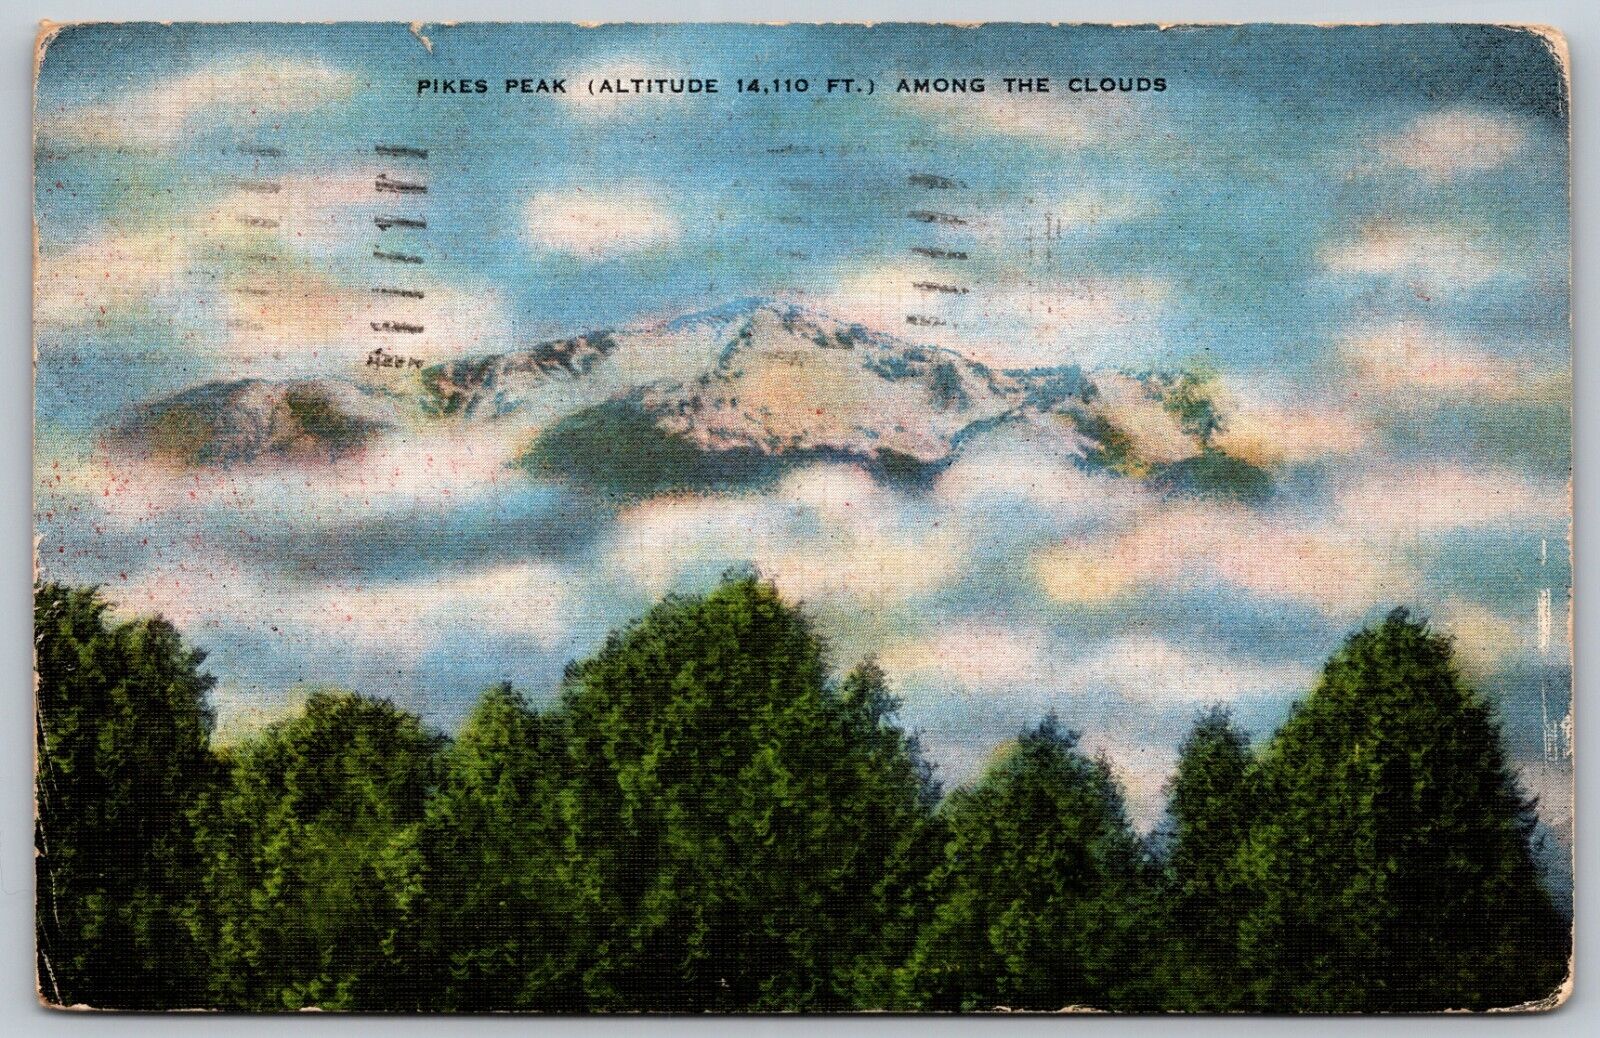 PIKES PEAK ALTITUDE 14,110 FT. AMONG THE CLOUDS POSTED 10/6/1953 POSTCARD